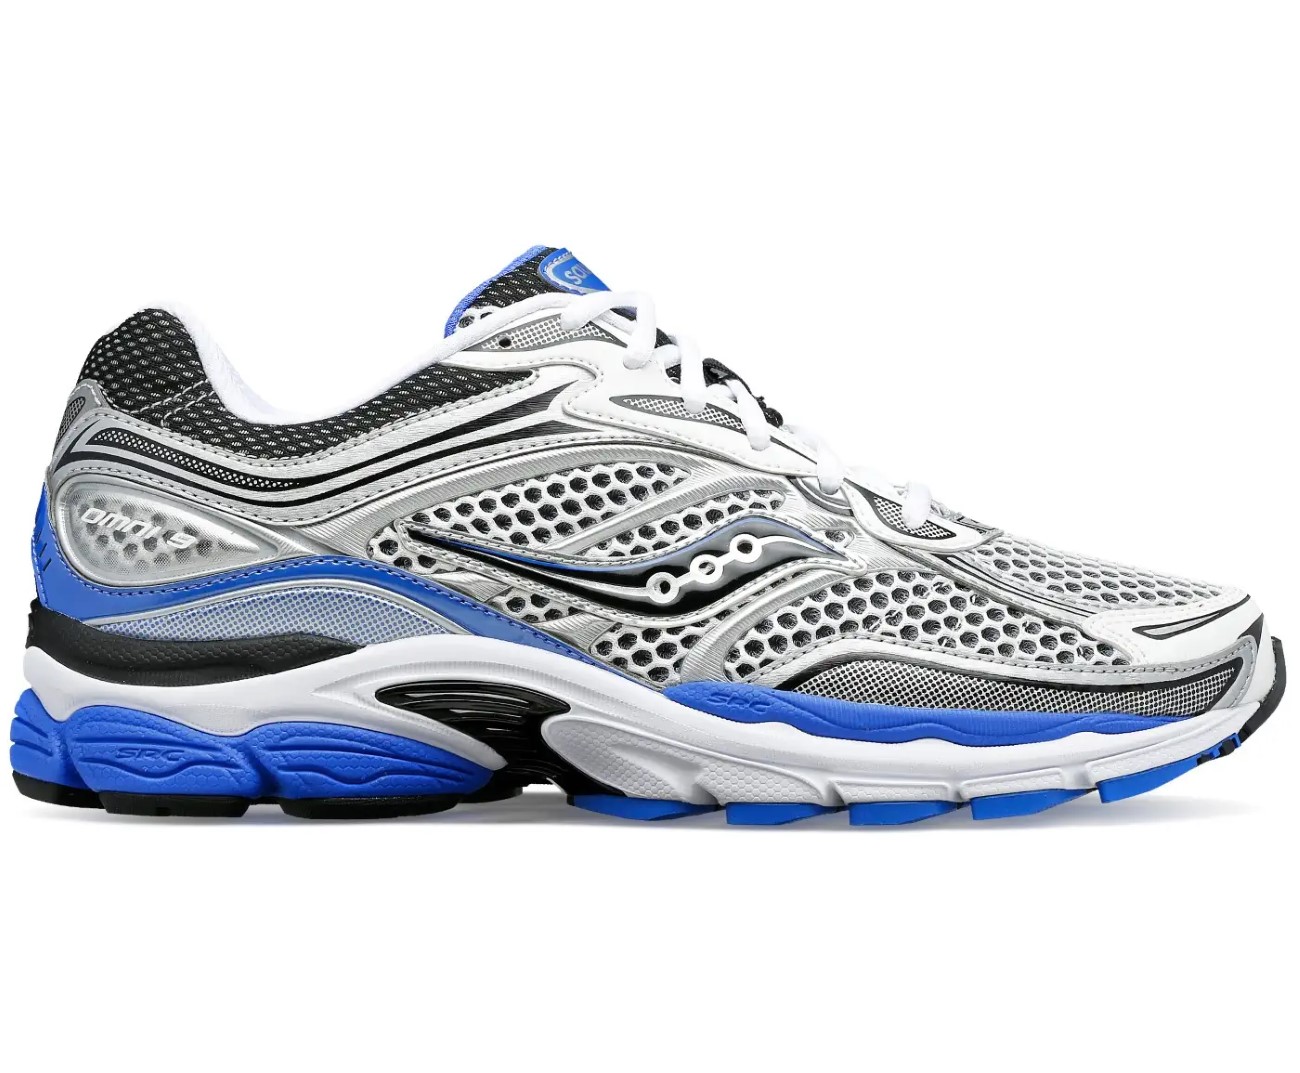 Saucony Originals ProGrid Omni 9, a timeless classic reborn for the brand's 125th anniversary